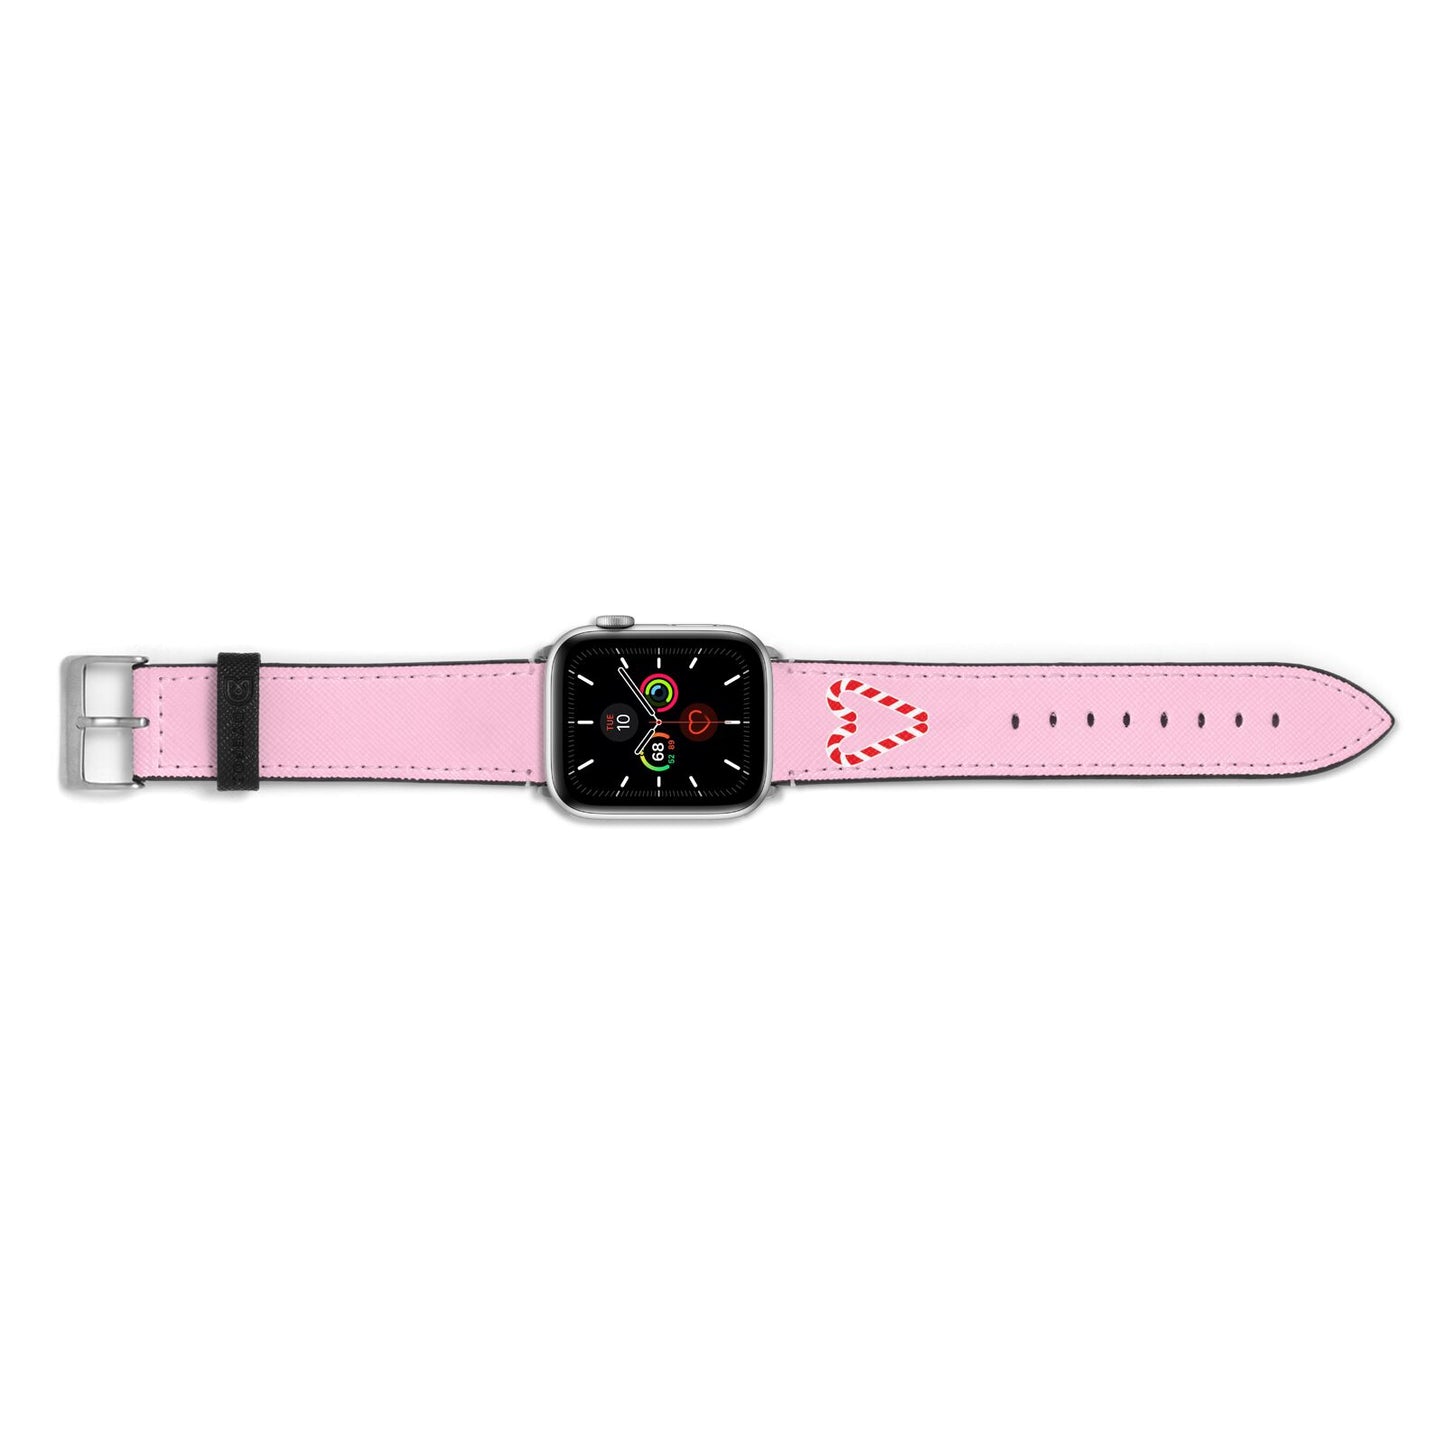 Candy Cane Heart Apple Watch Strap Landscape Image Silver Hardware